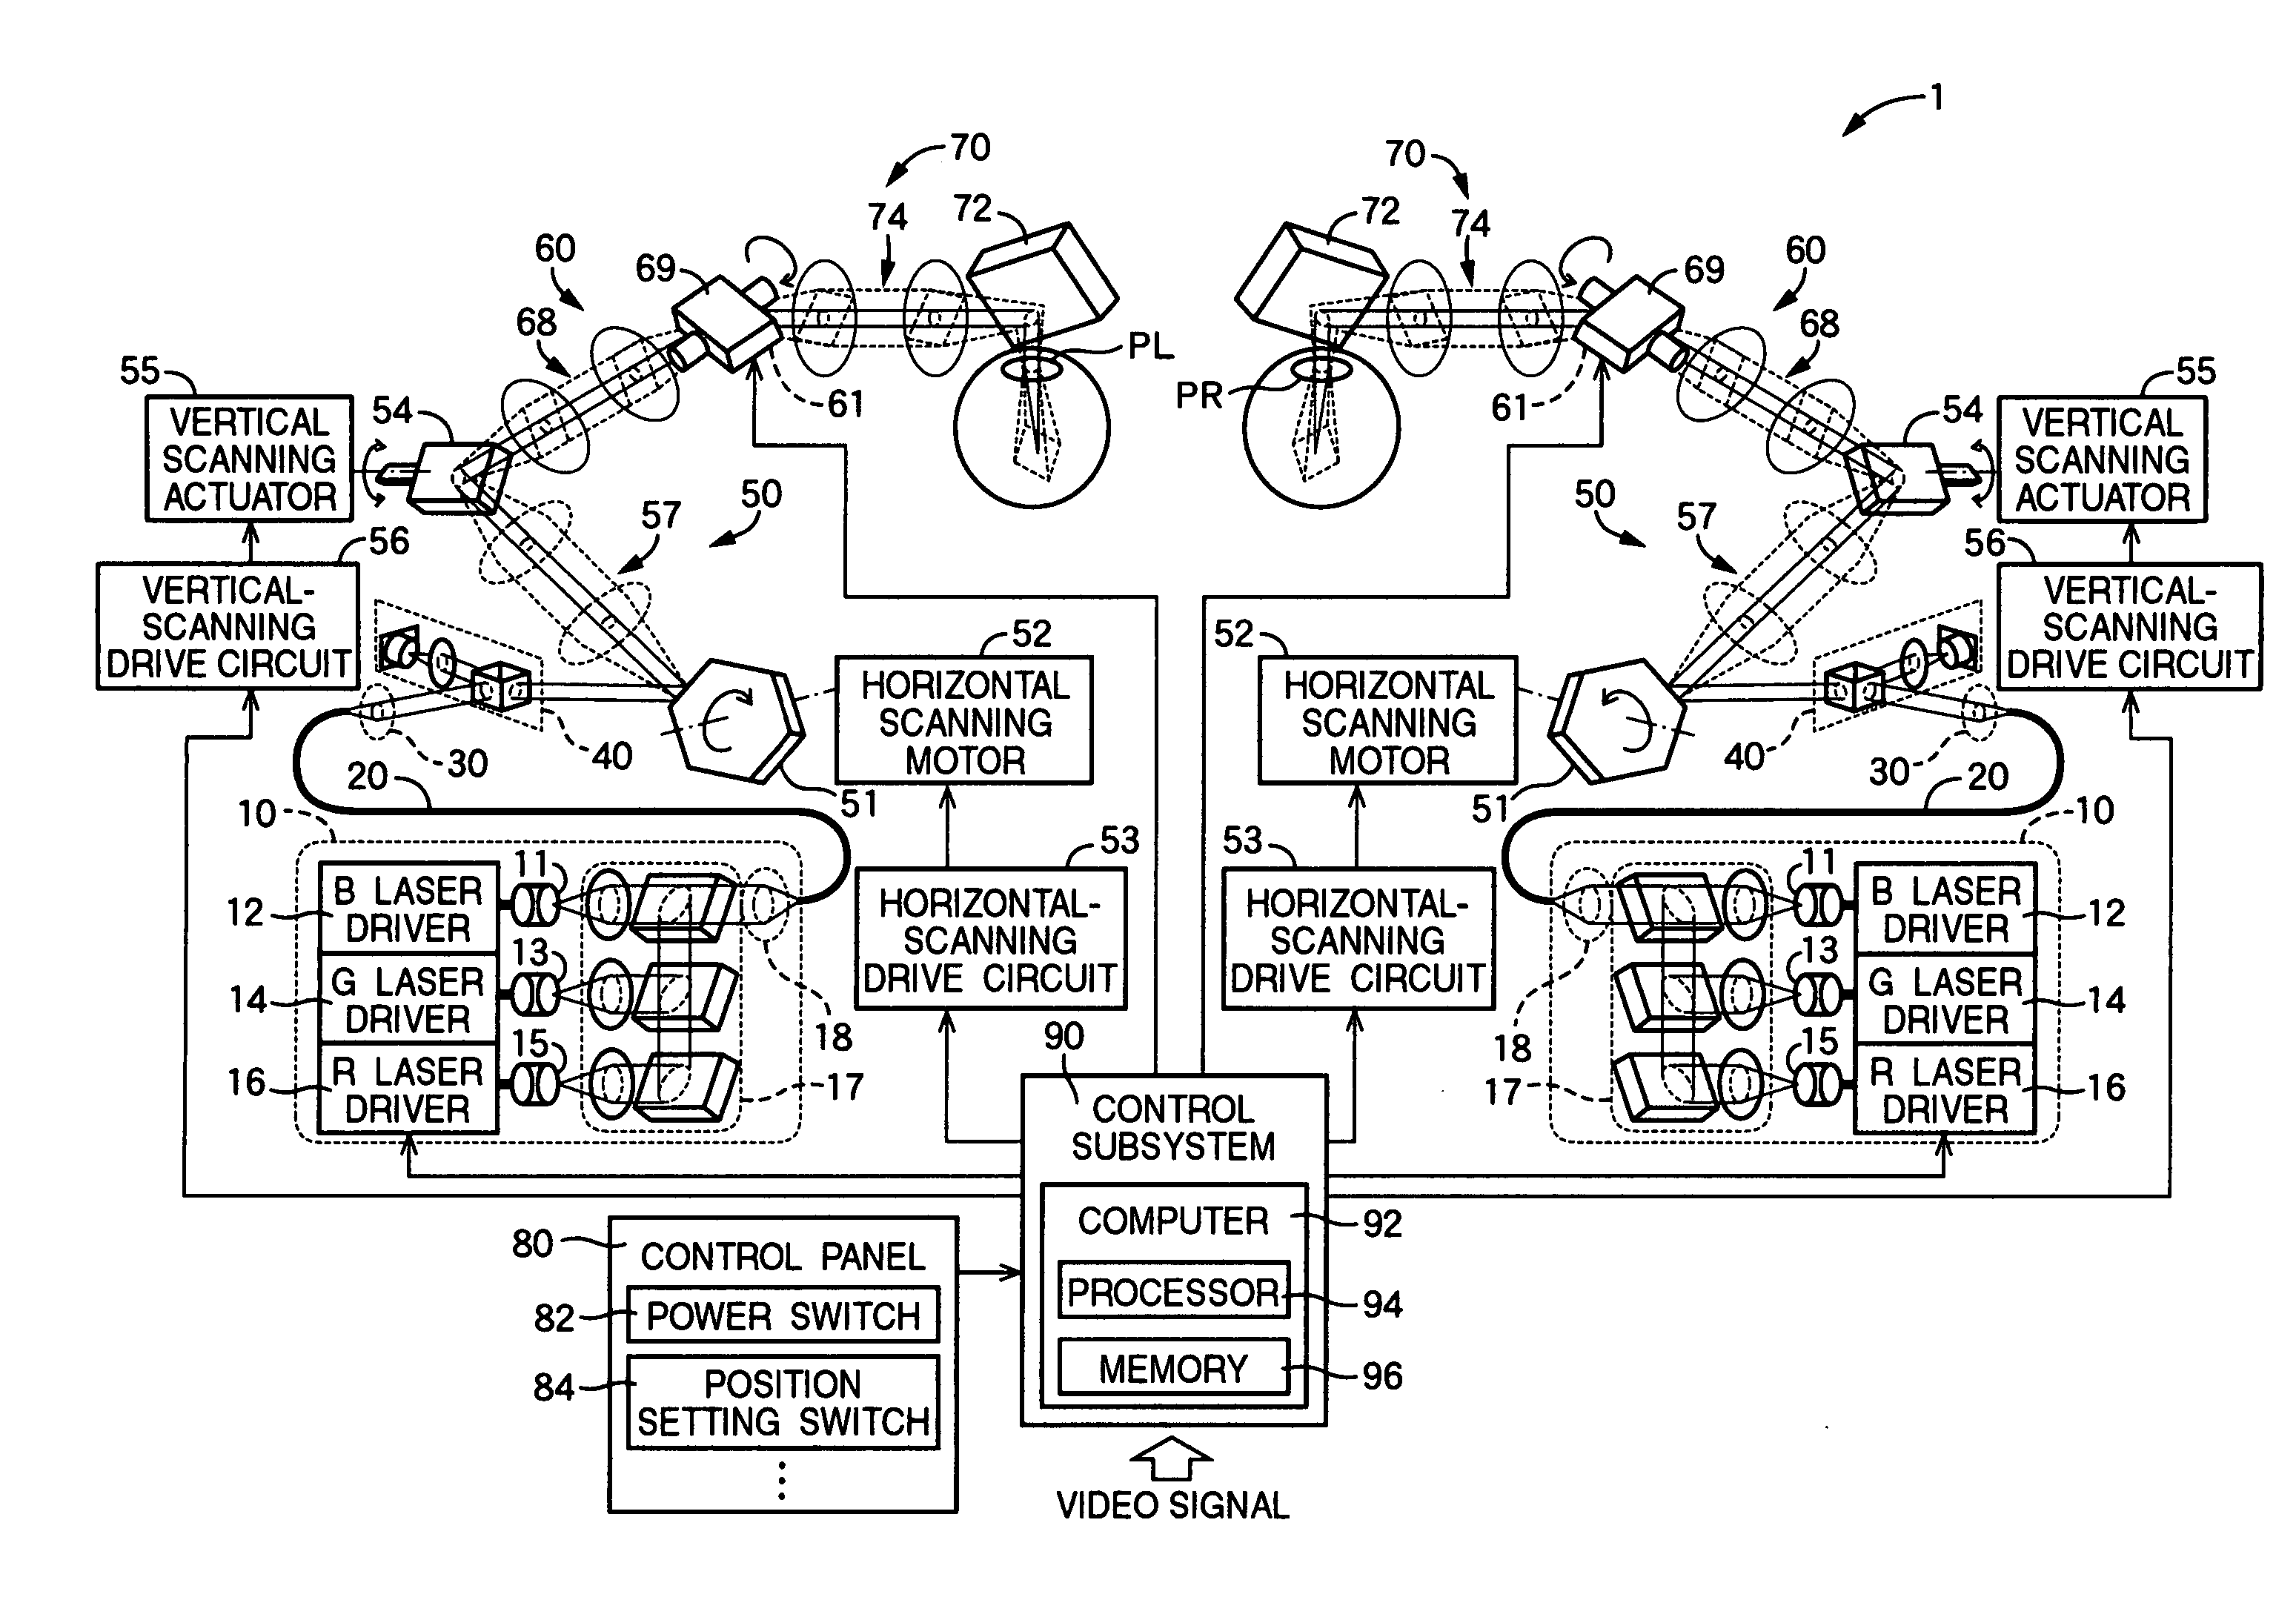 Image display apparatus for displaying image in variable direction relative to viewer